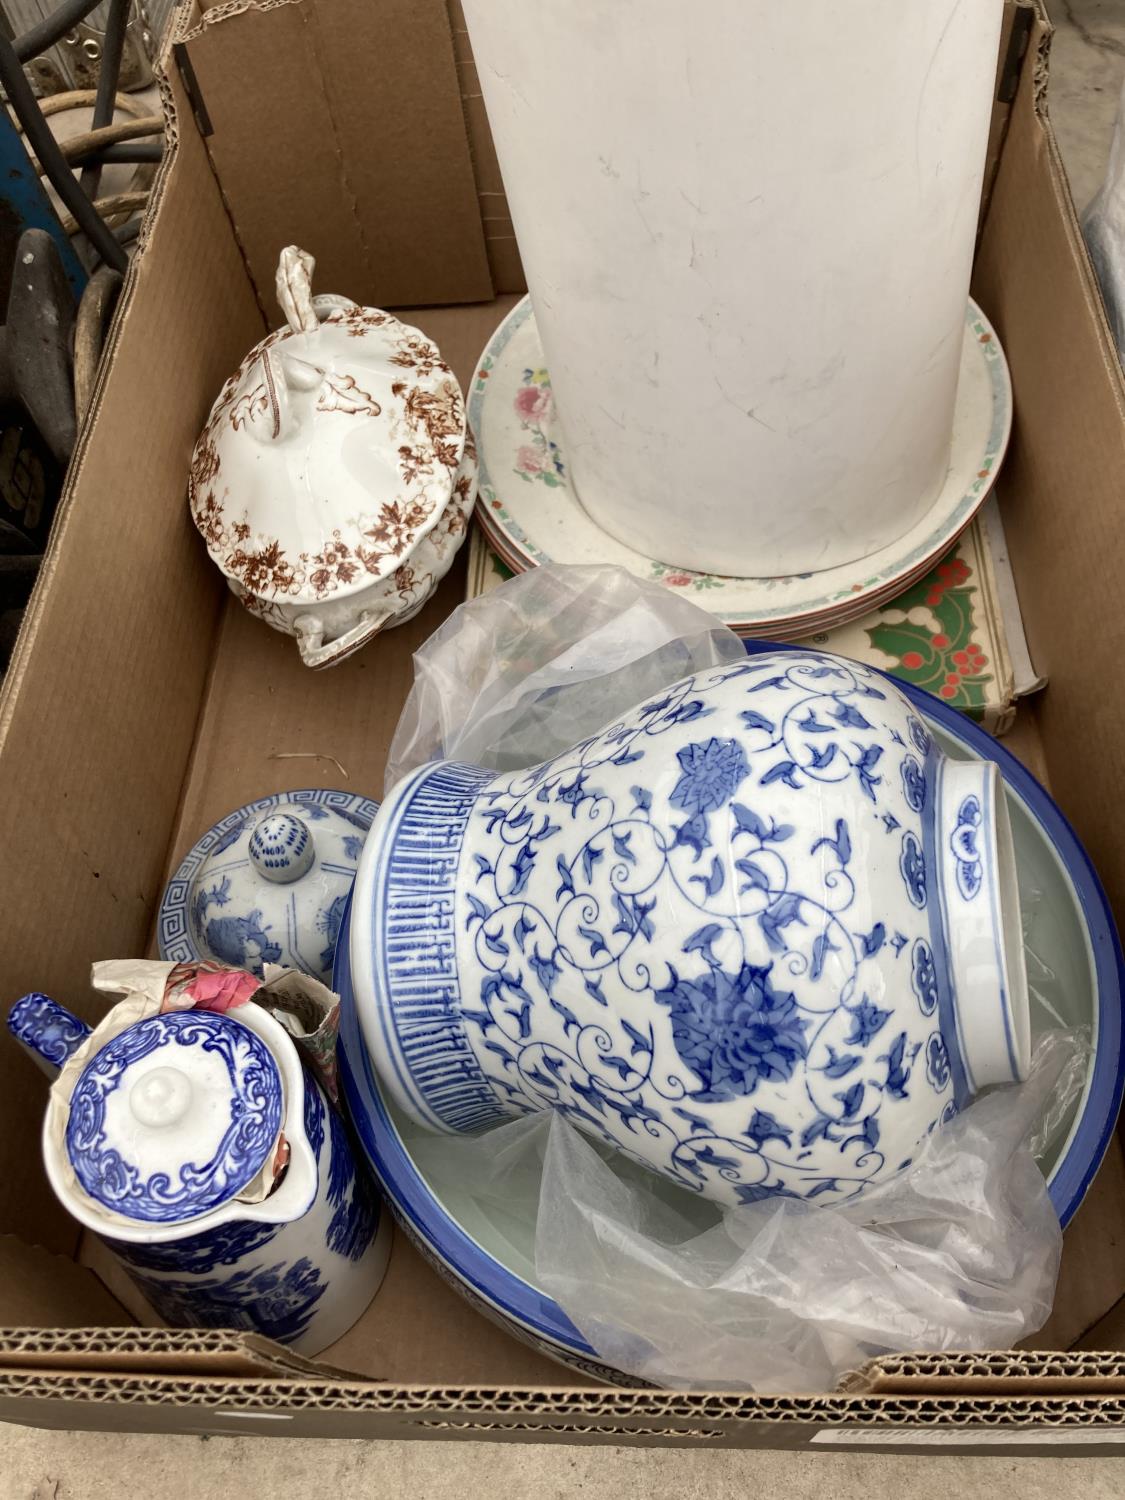 AN ASSORTMENT OF ITEMS TO INCLUDE A BLUE AND WHITE GINGER JAR, AN ASSORTMENT OF GLOVES AND A CERAMIC - Image 3 of 6